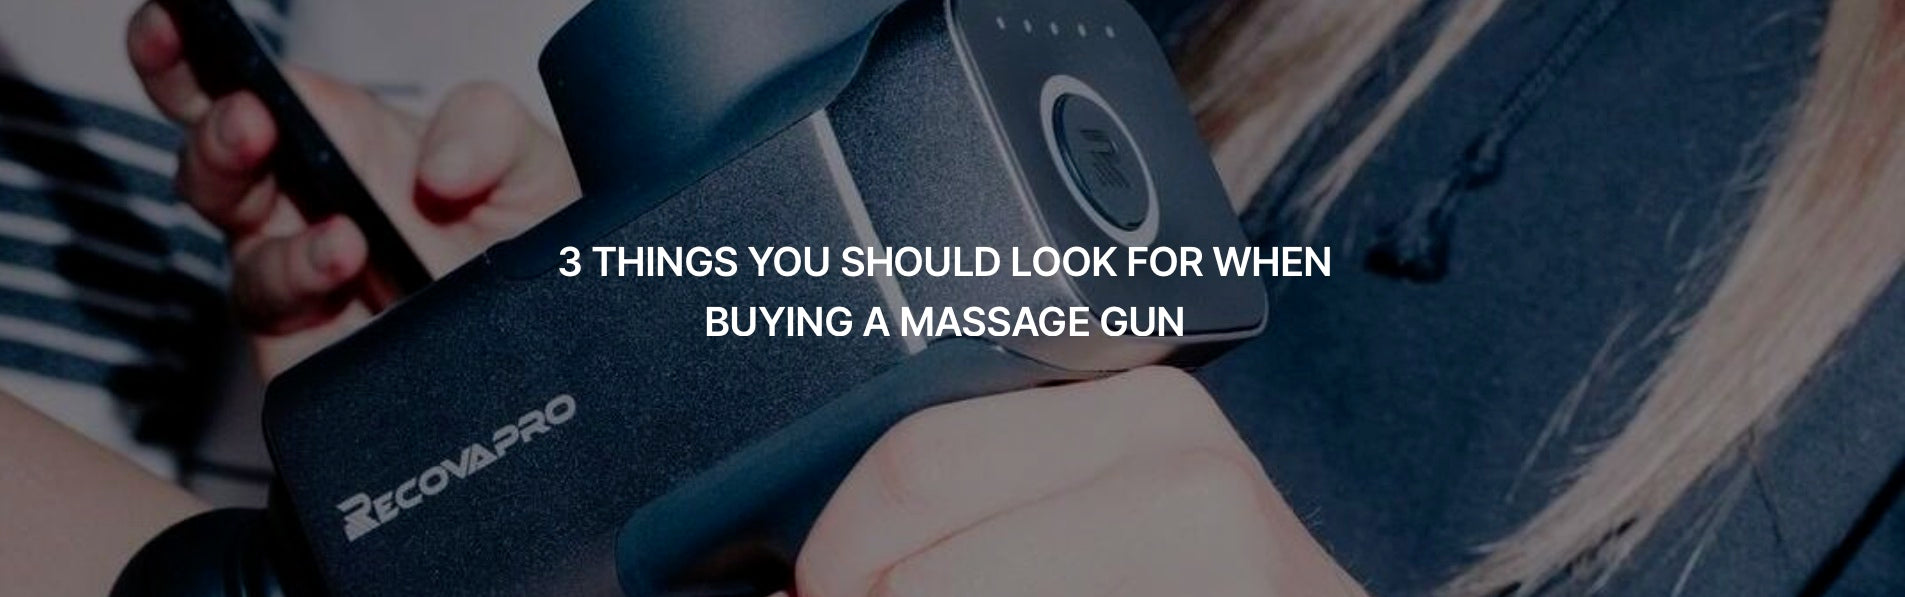 3 THINGS YOU SHOULD LOOK FOR WHEN BUYING A MASSAGE GUN